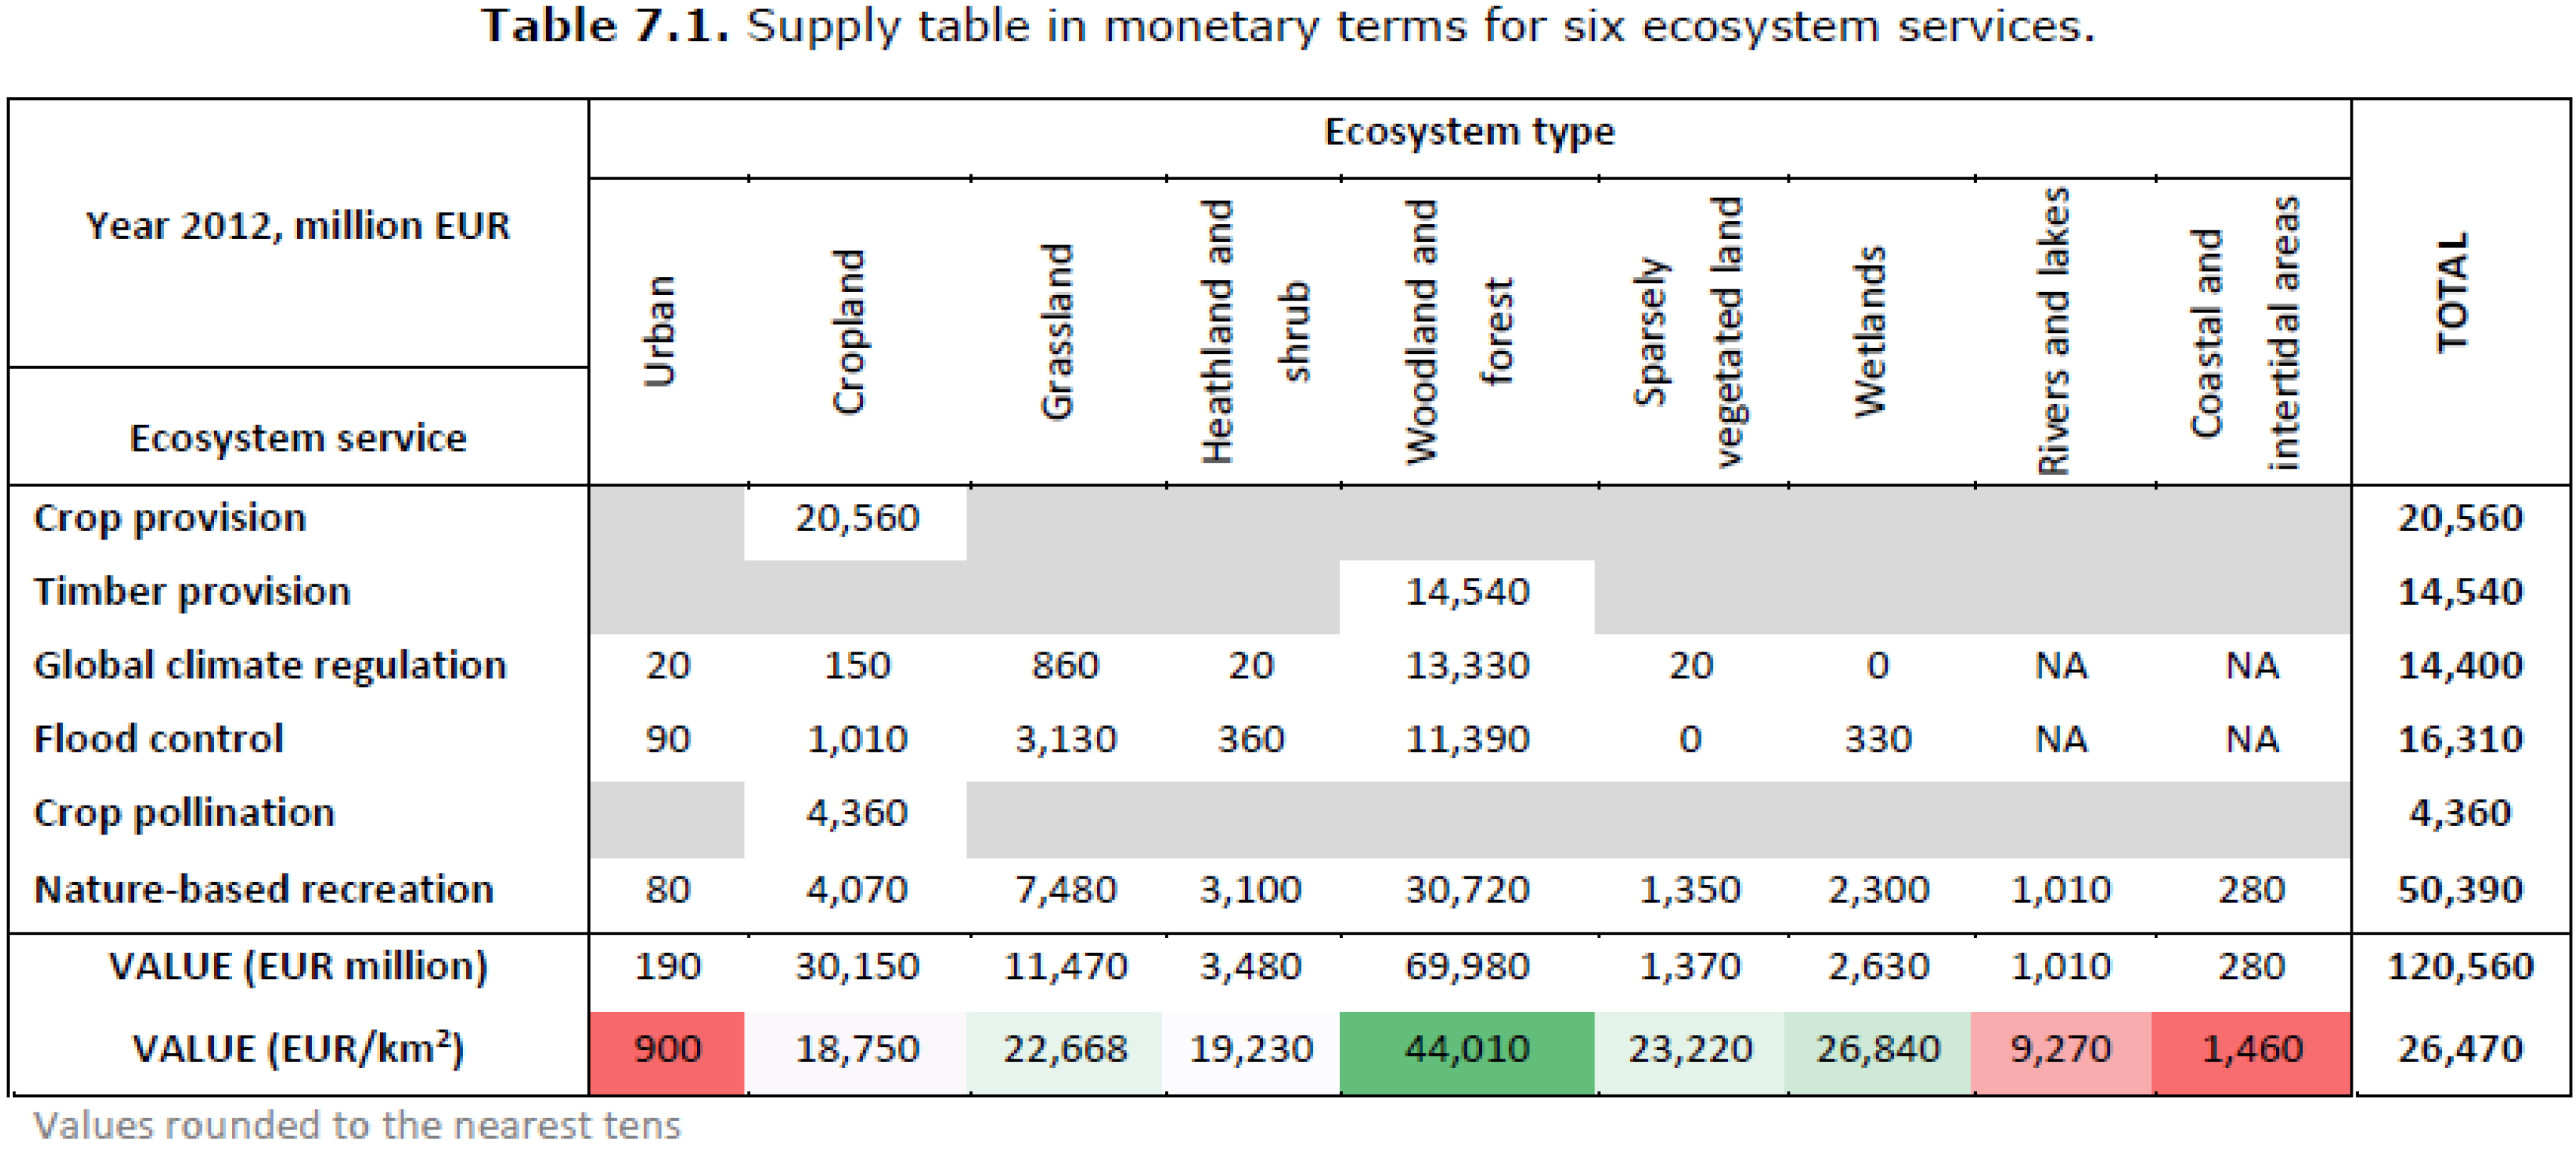 Monetary Supply table of six ecosystem services for the EU territory. Source: [38].